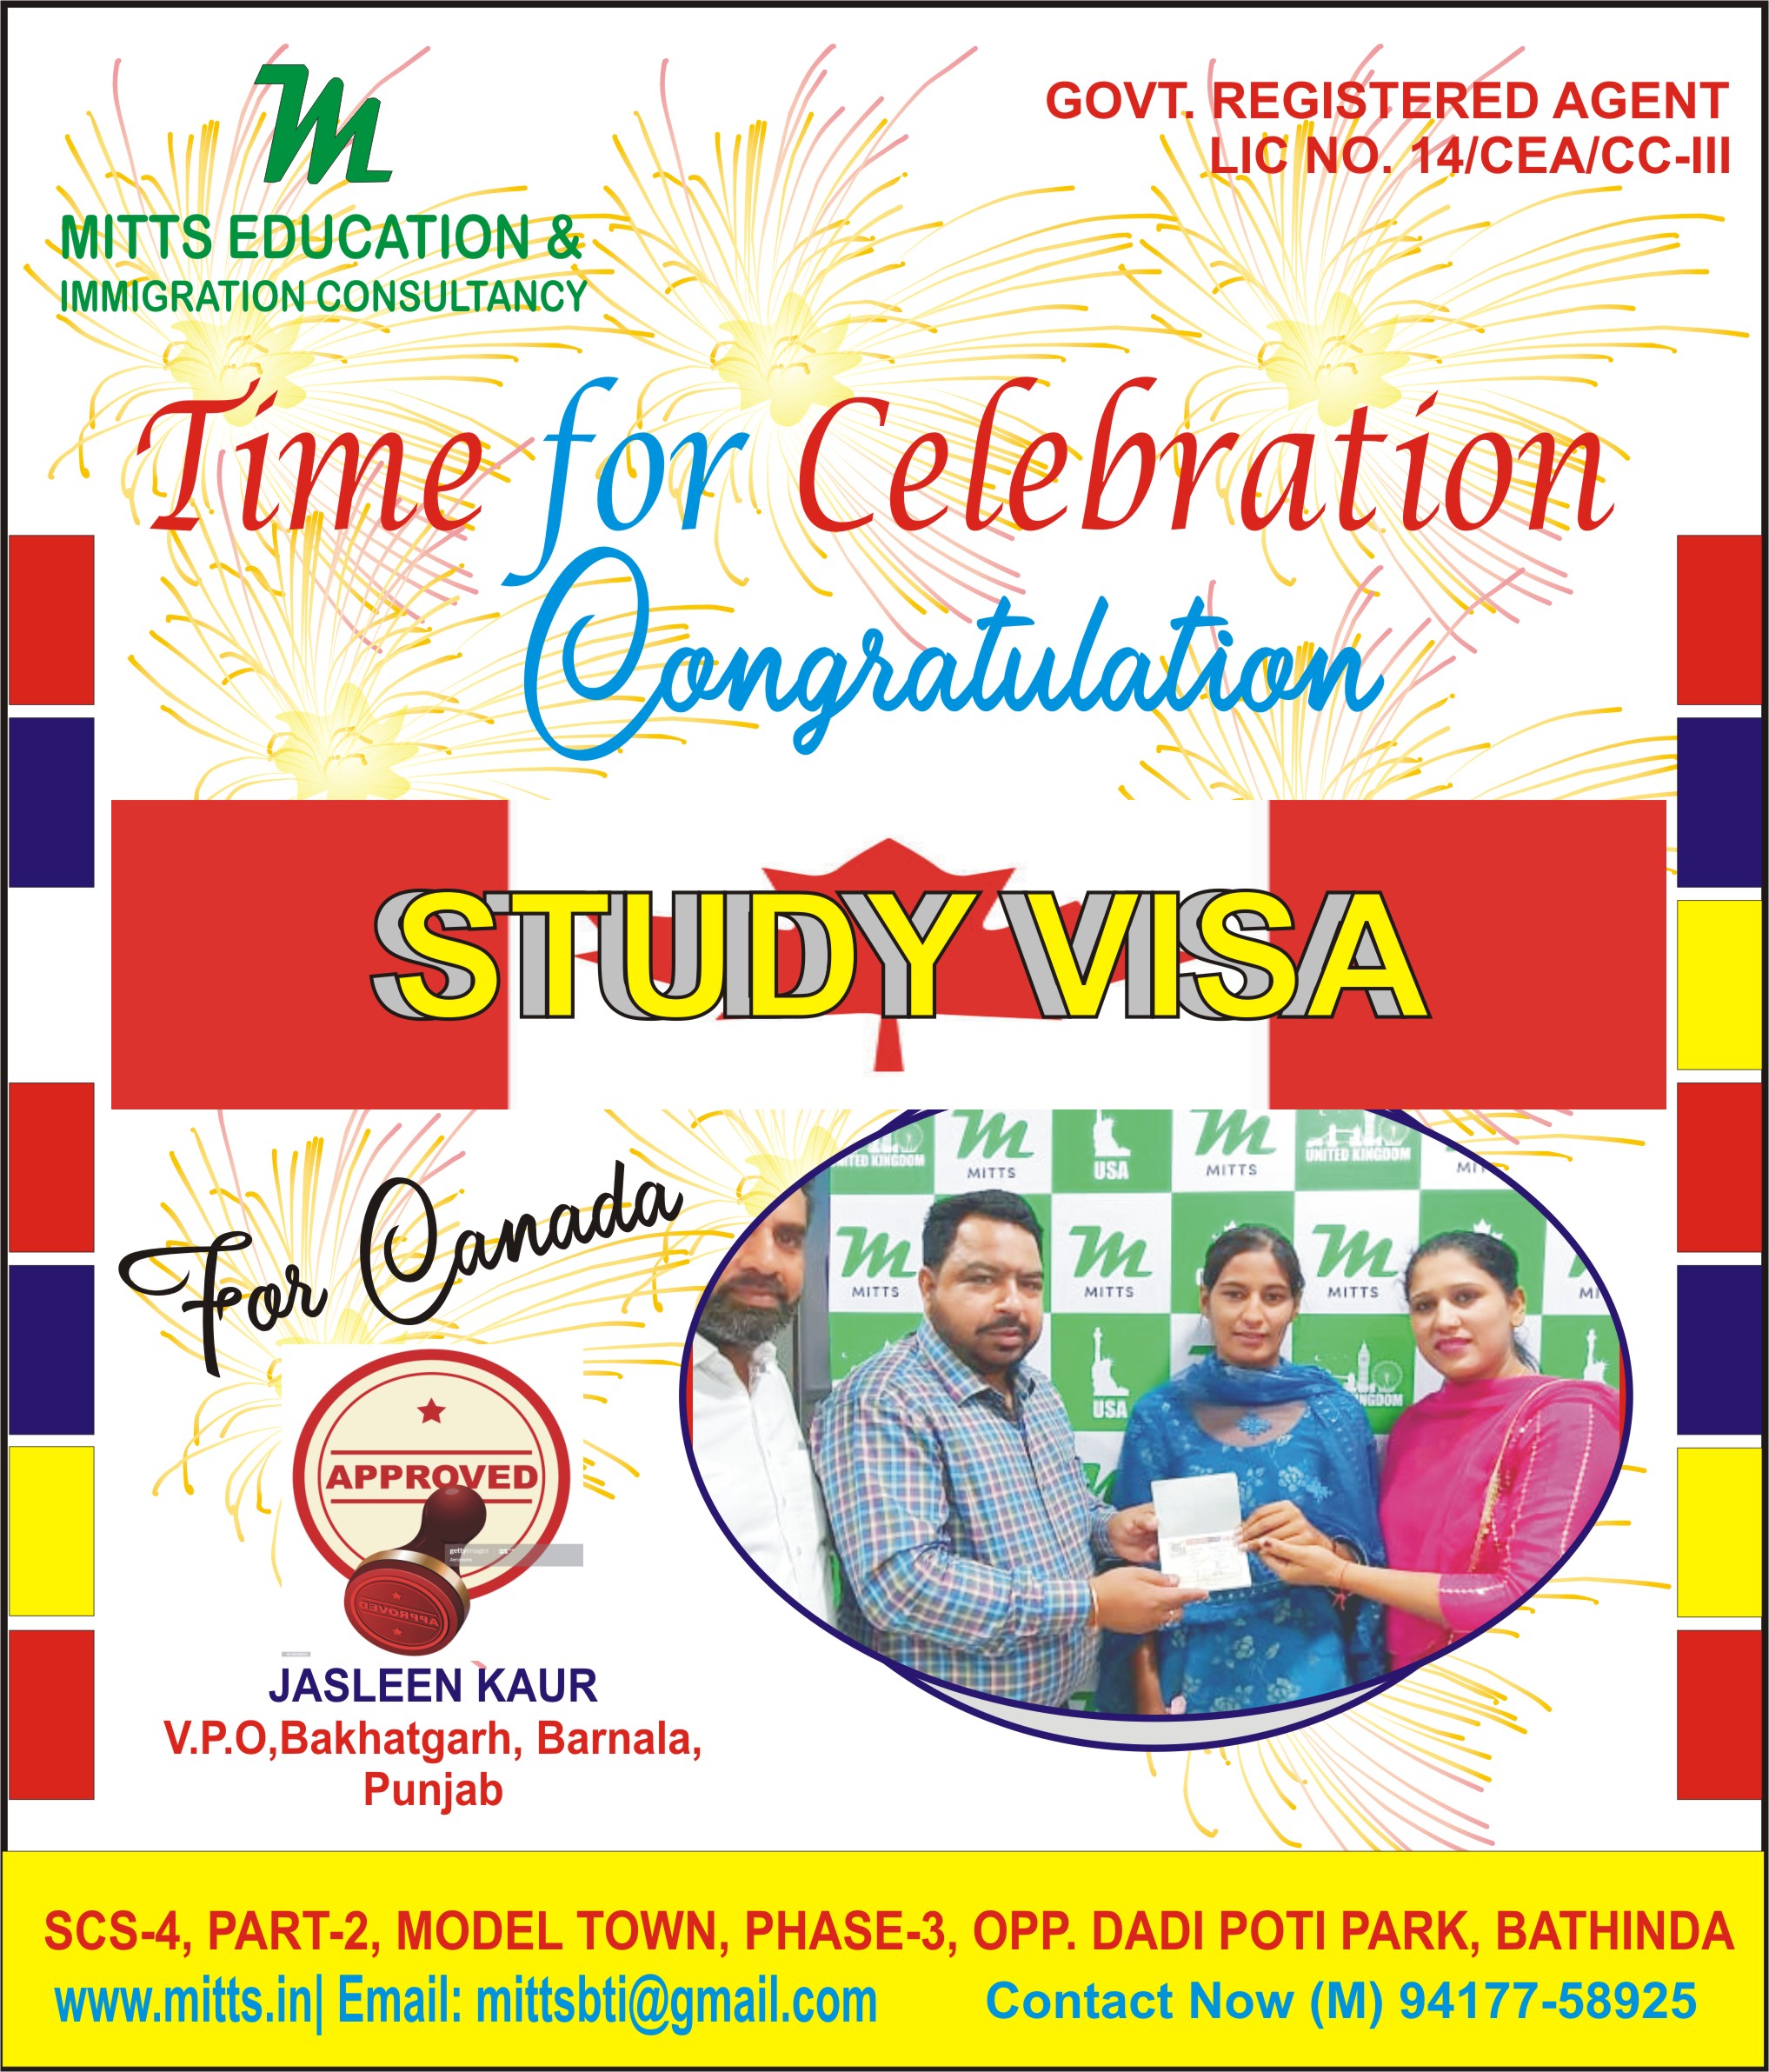 Mitts Education & Immigration Consultancy